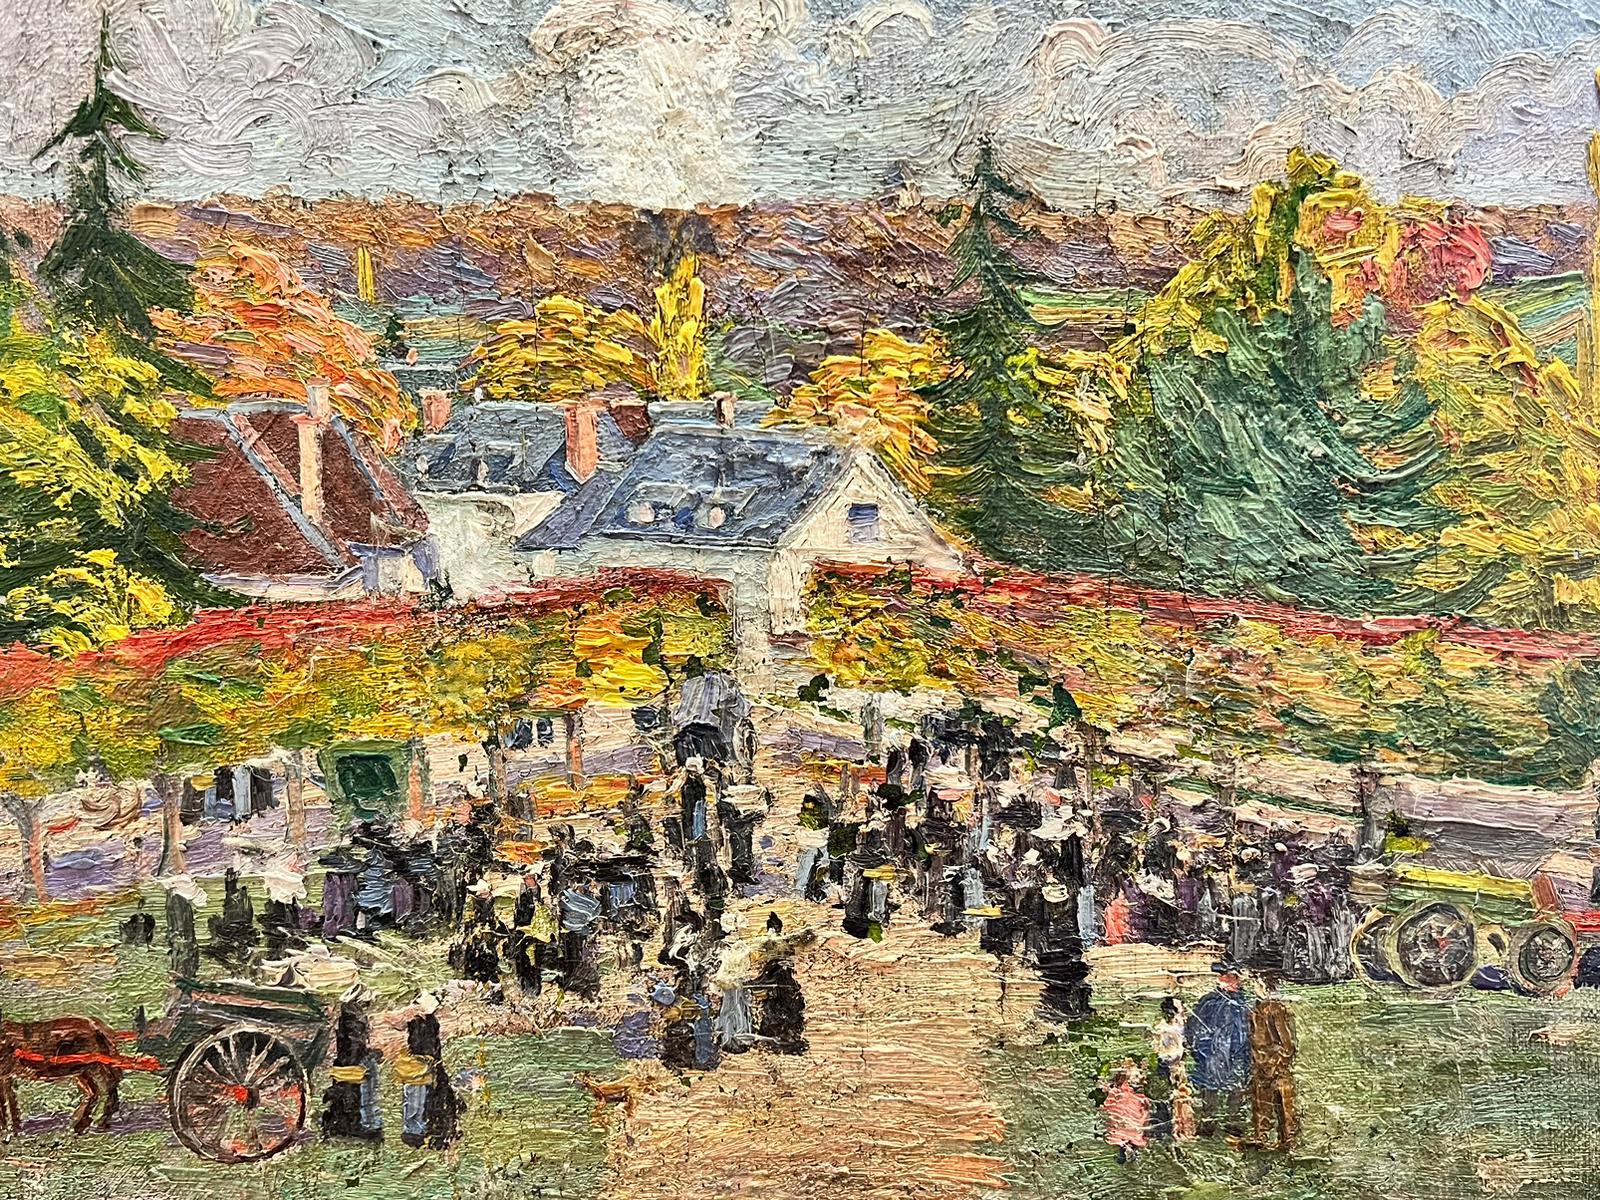 Village Fete Market Gathering 1930's French Post Impressionist Oil Painting For Sale 3